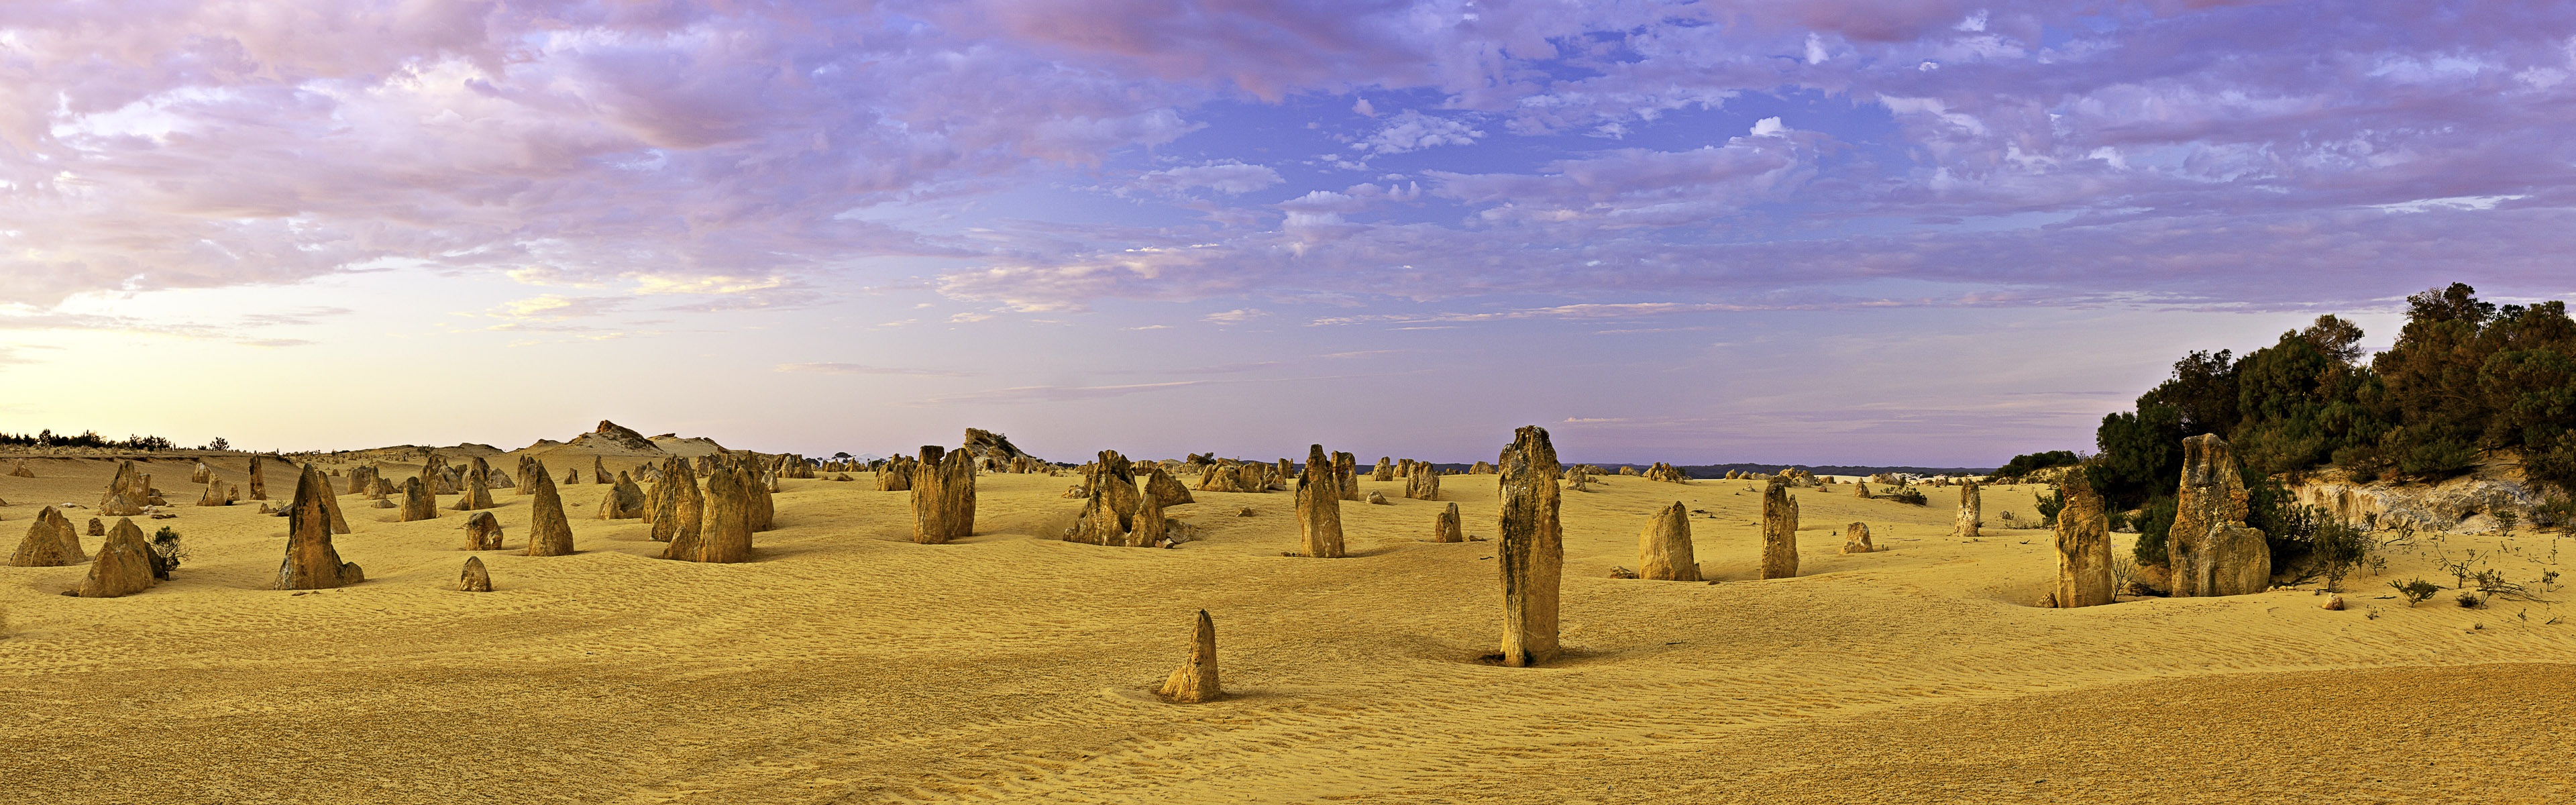 Hot and arid deserts, Windows 8 panoramic widescreen wallpapers #8 - 3840x1200